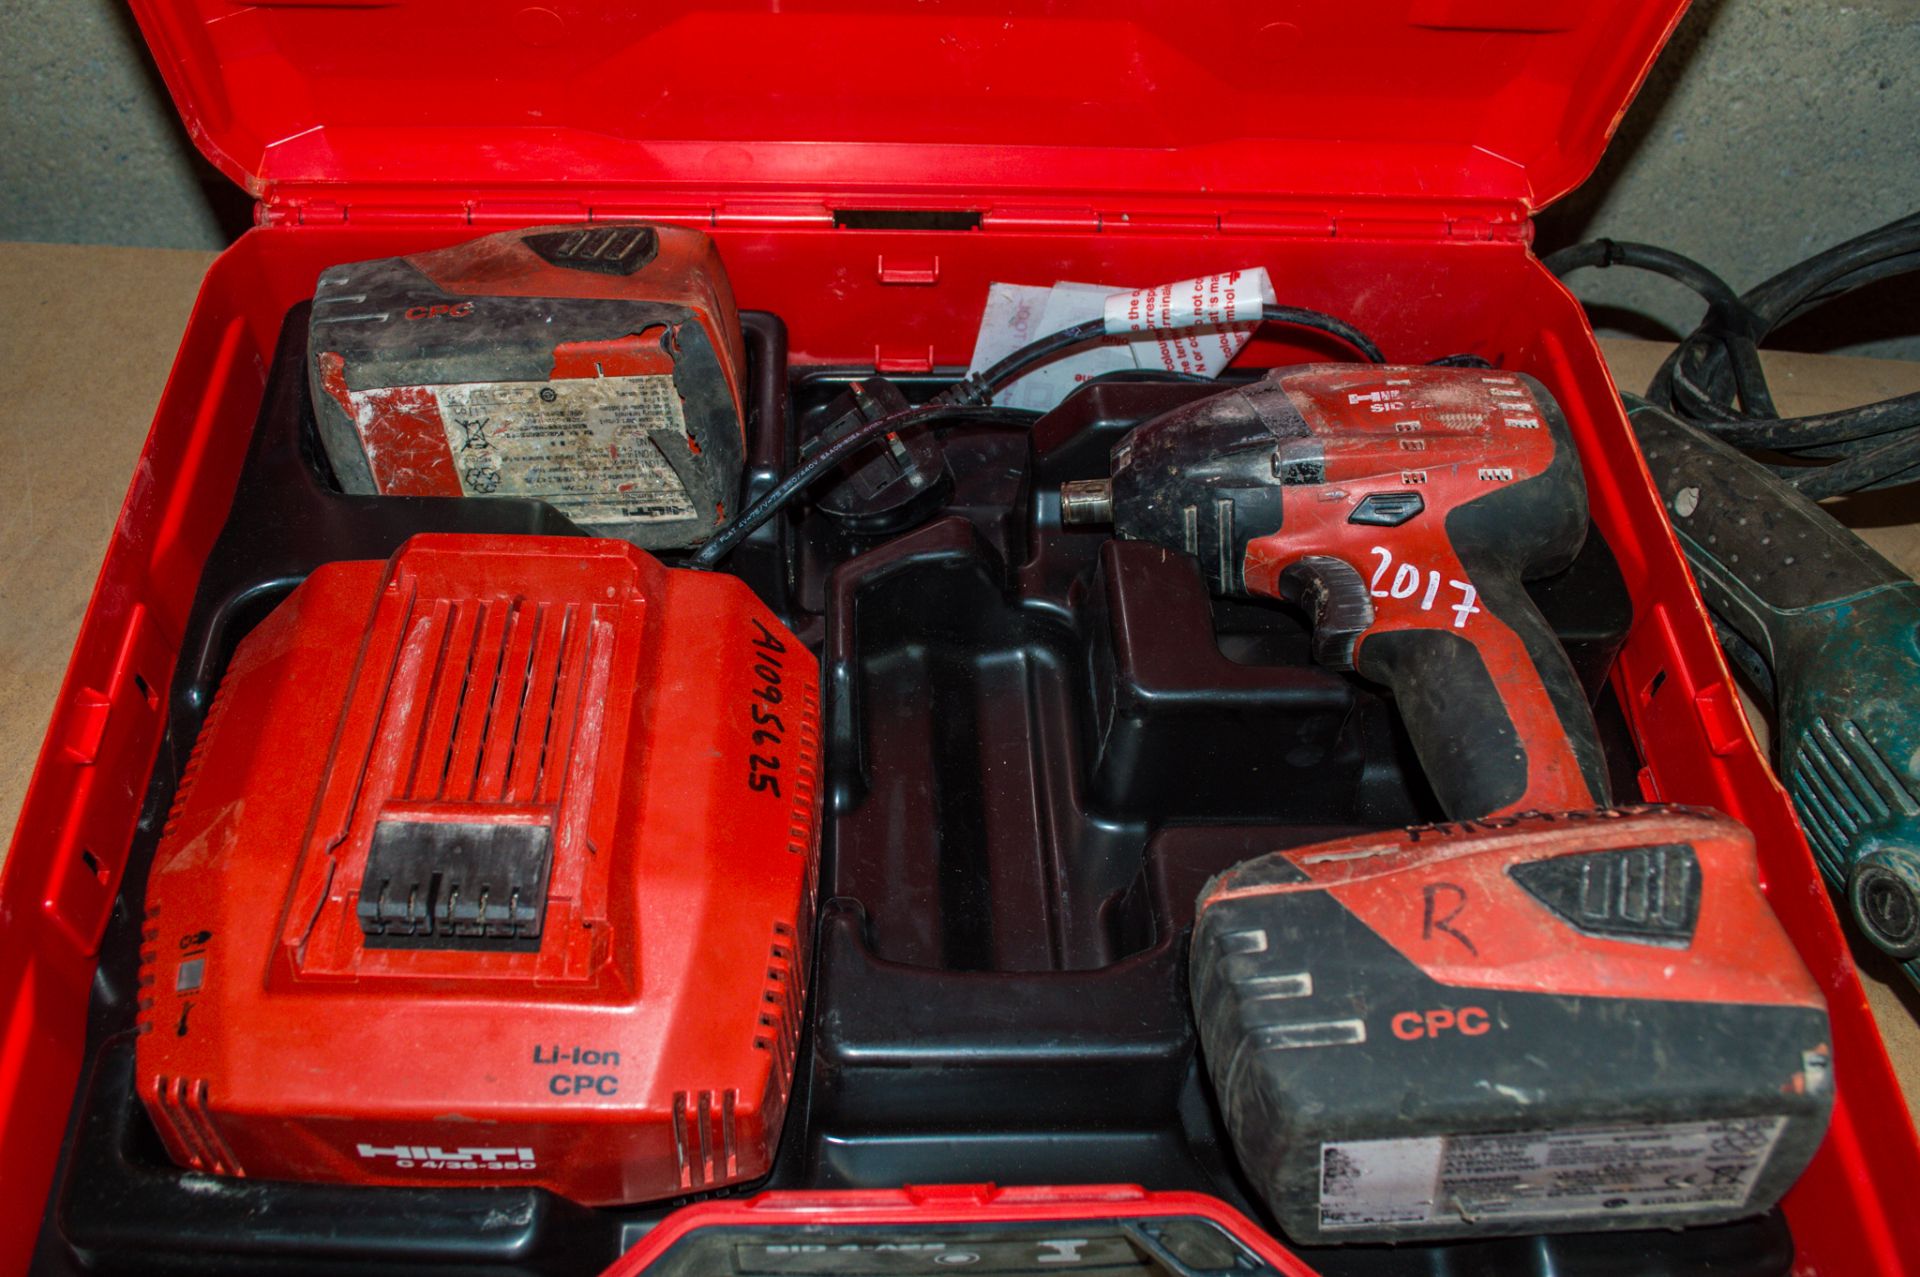 Hilti SID4-A22 22v cordless 1/2 inch drive impact gun c/w 2 batteries, charger and carry case